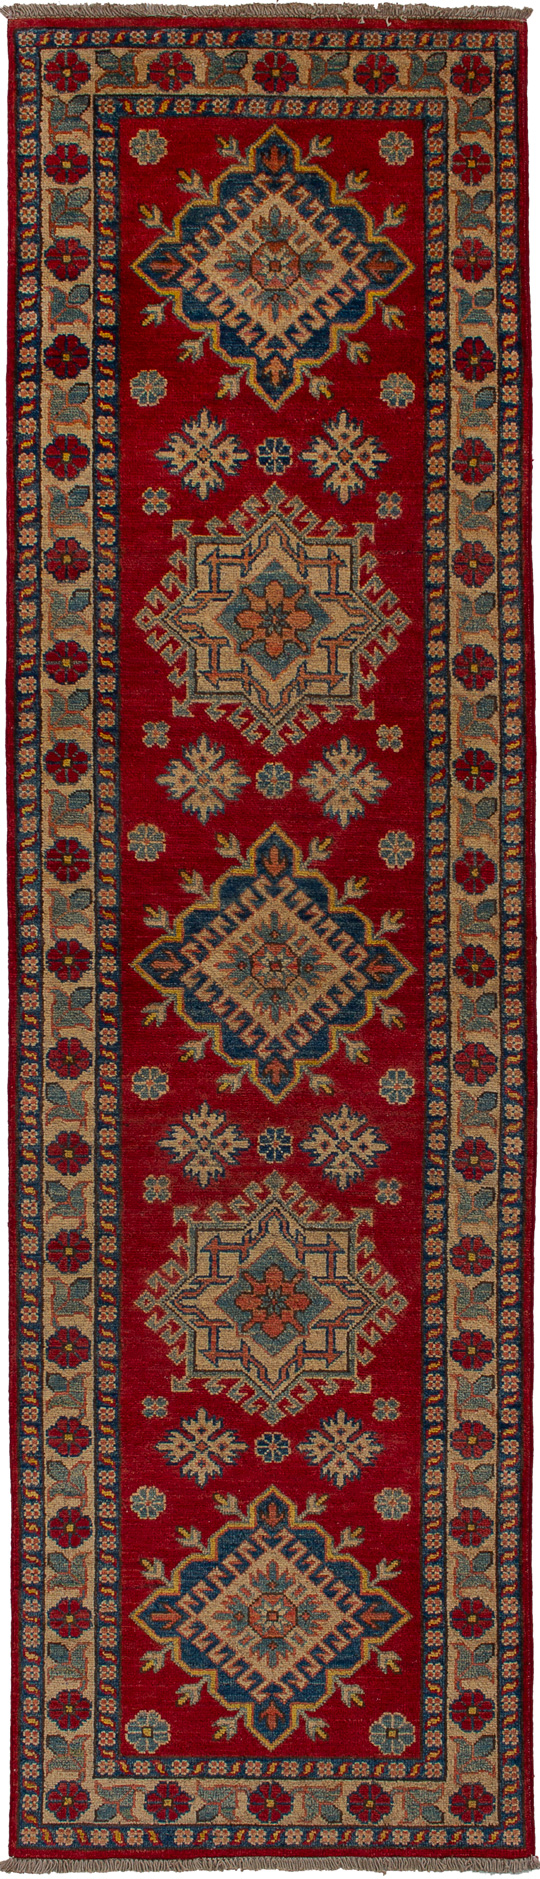 Hand-knotted Finest Gazni Red Wool Rug 2'5" x 9'5" Size: 2'5" x 9'5"  